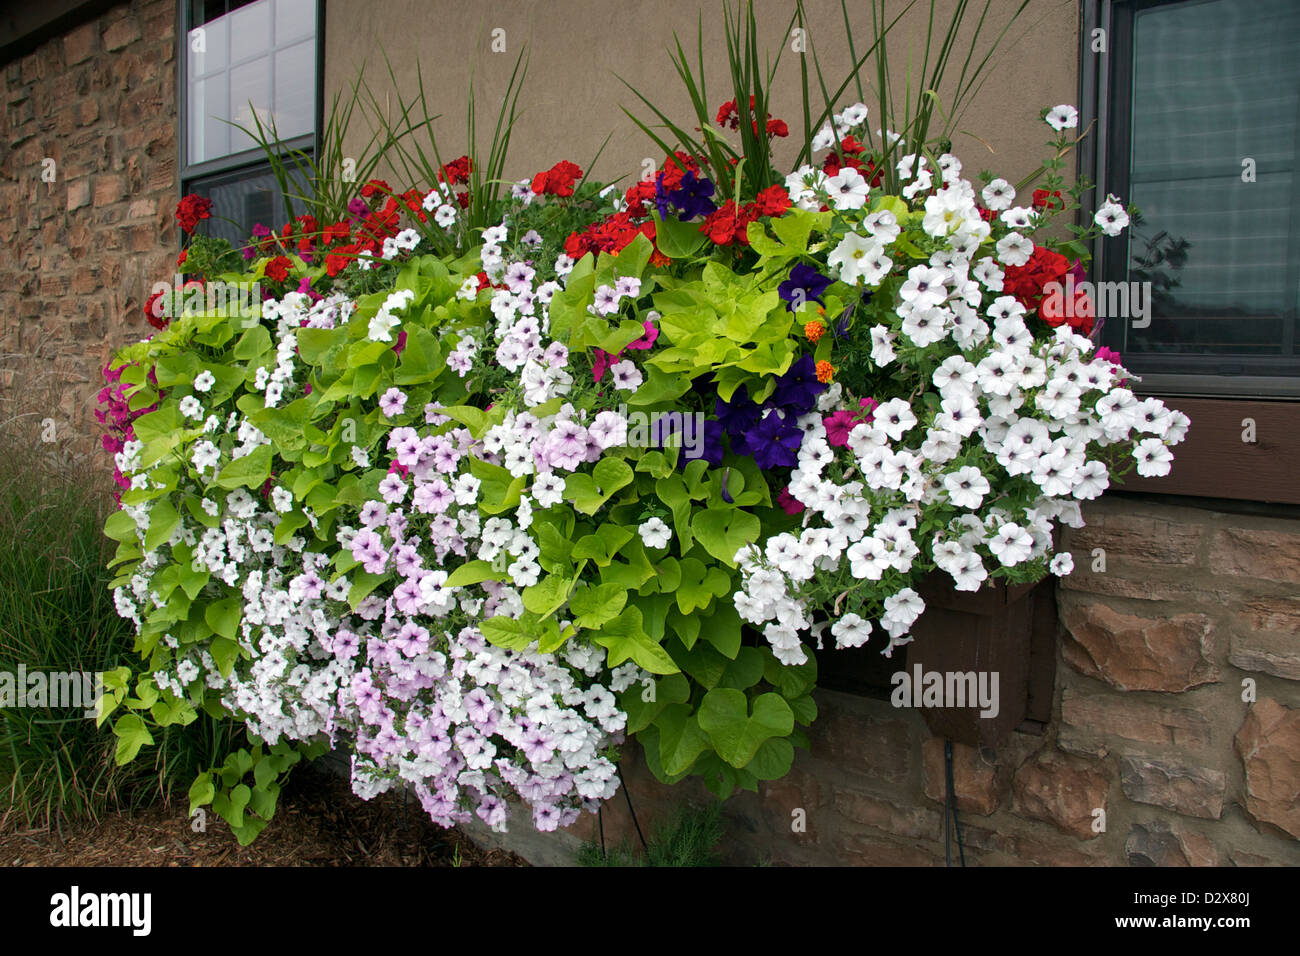 Red White Annuals High Resolution Stock Photography and Images - Alamy